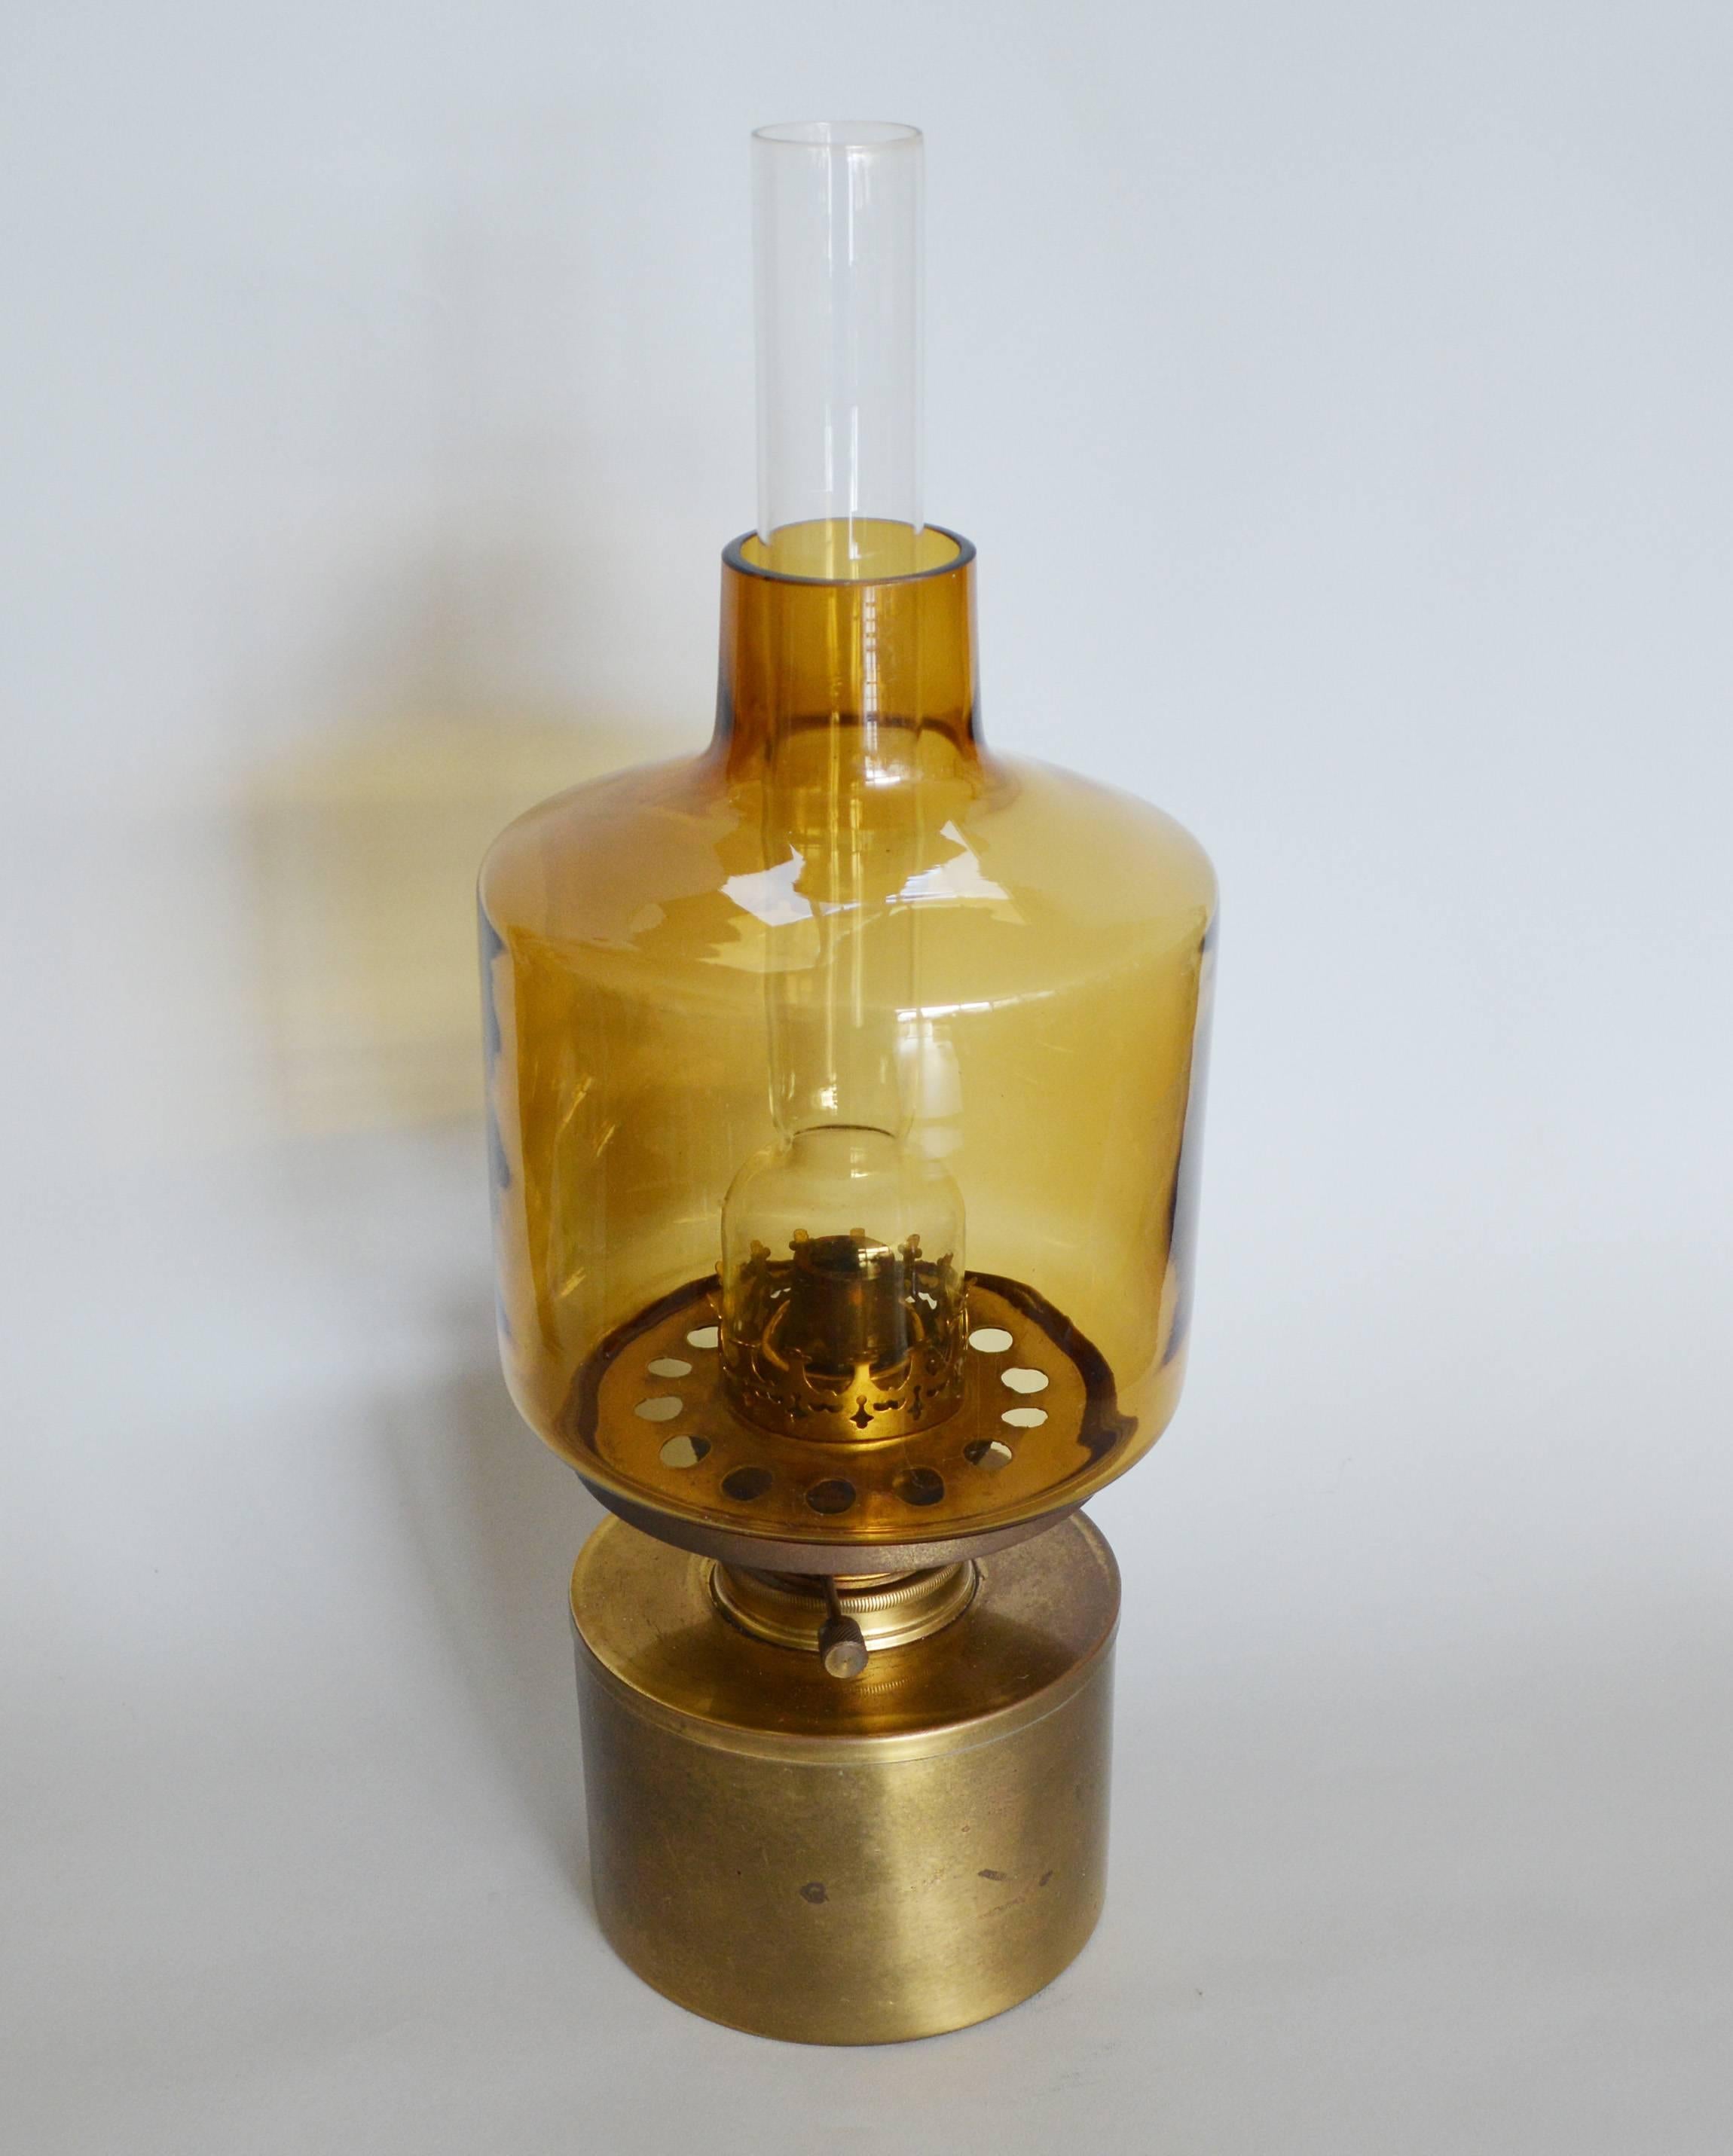 Oil lamp designed by Hans-Agne Jakobsson for AB Markaryd. This is the large L-47 model. The lamp is in working condition.